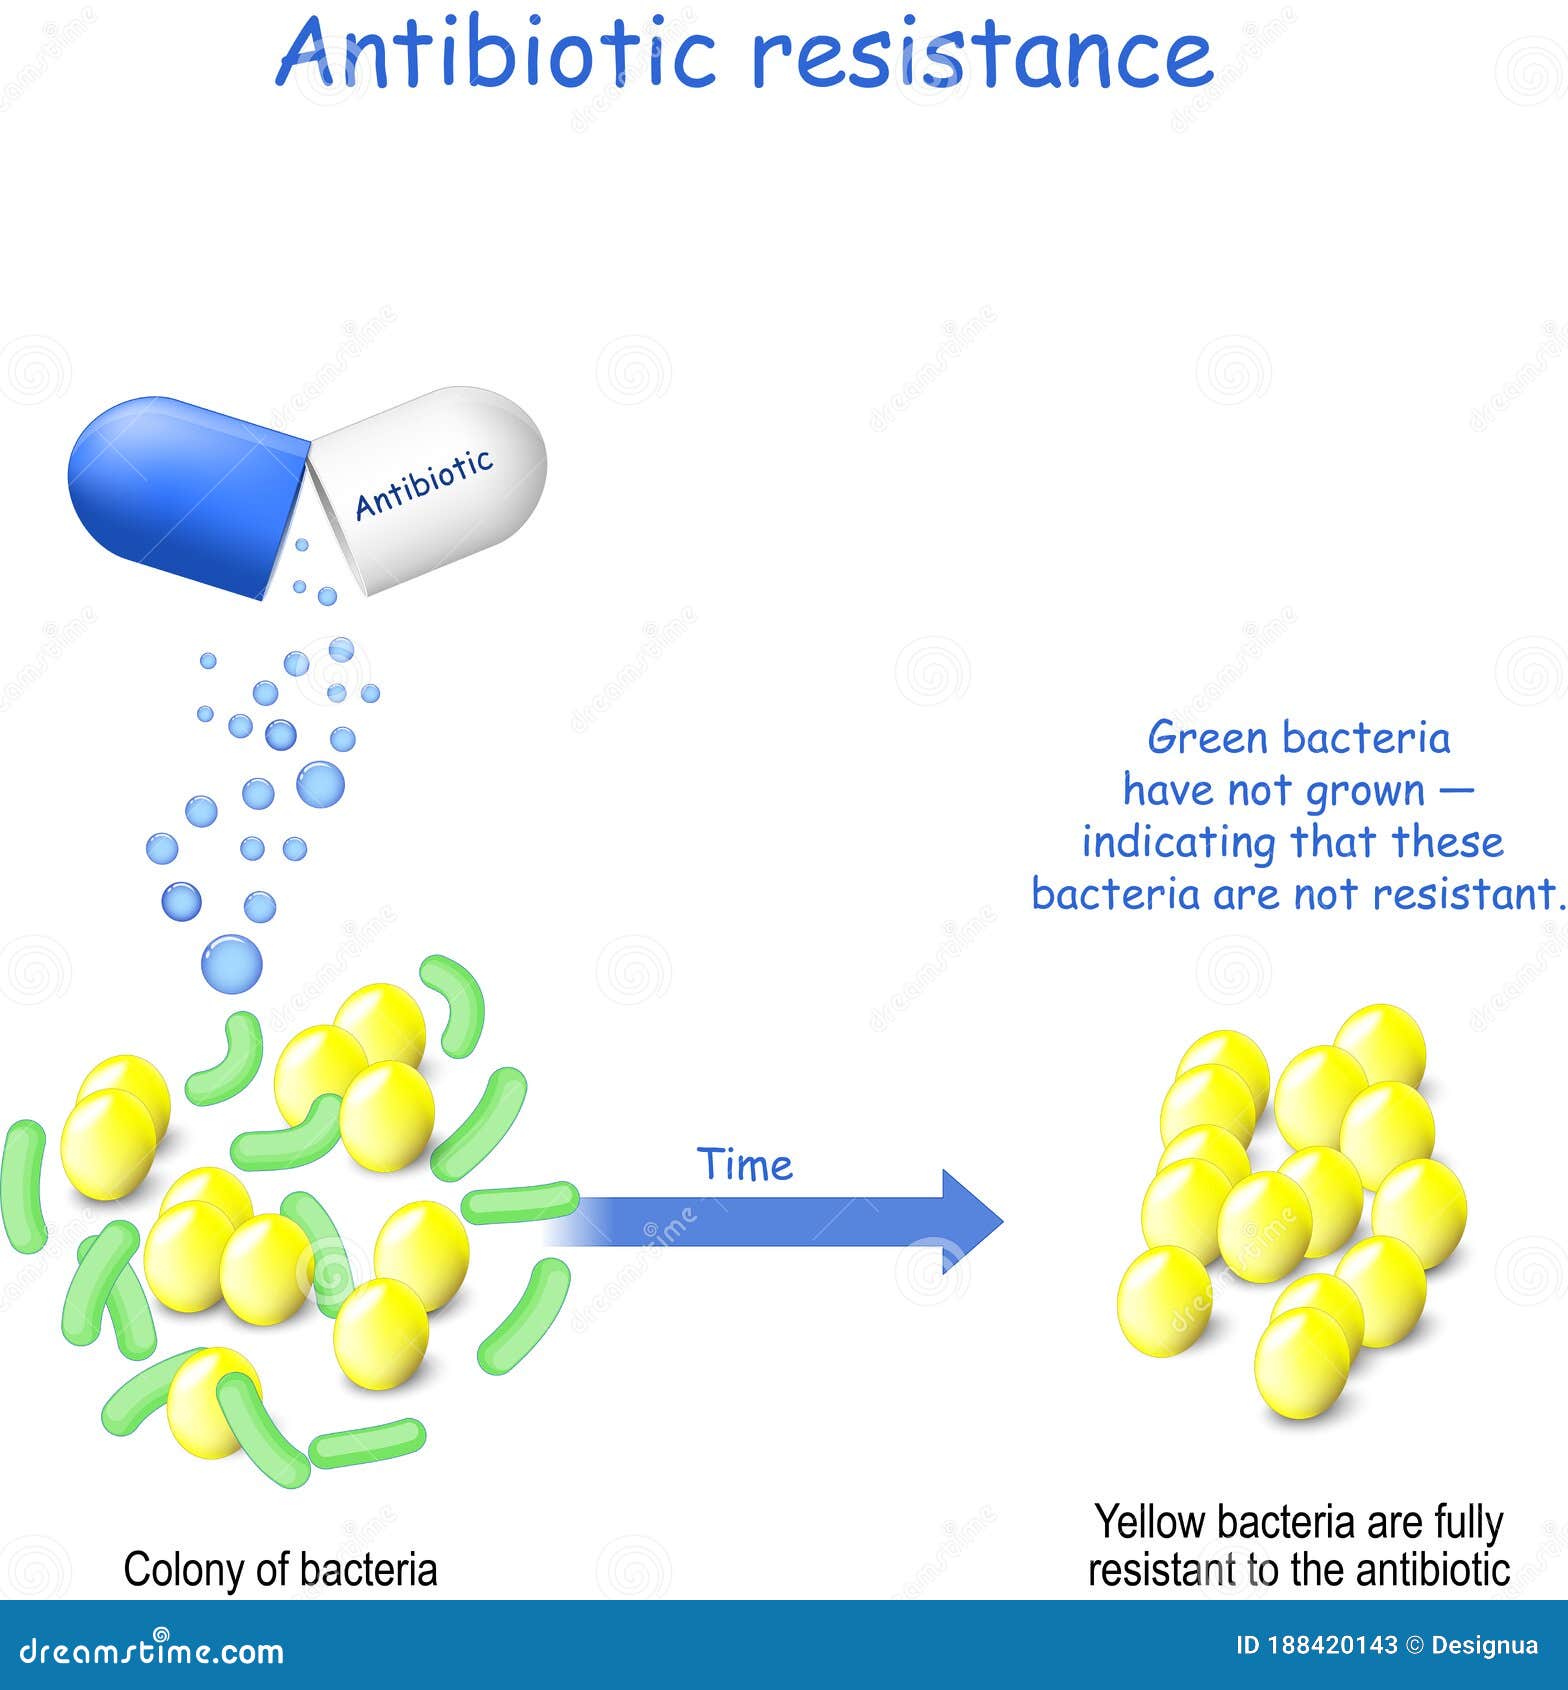 antibiotic resistance. colony of bacteria and capsule with antibiotic